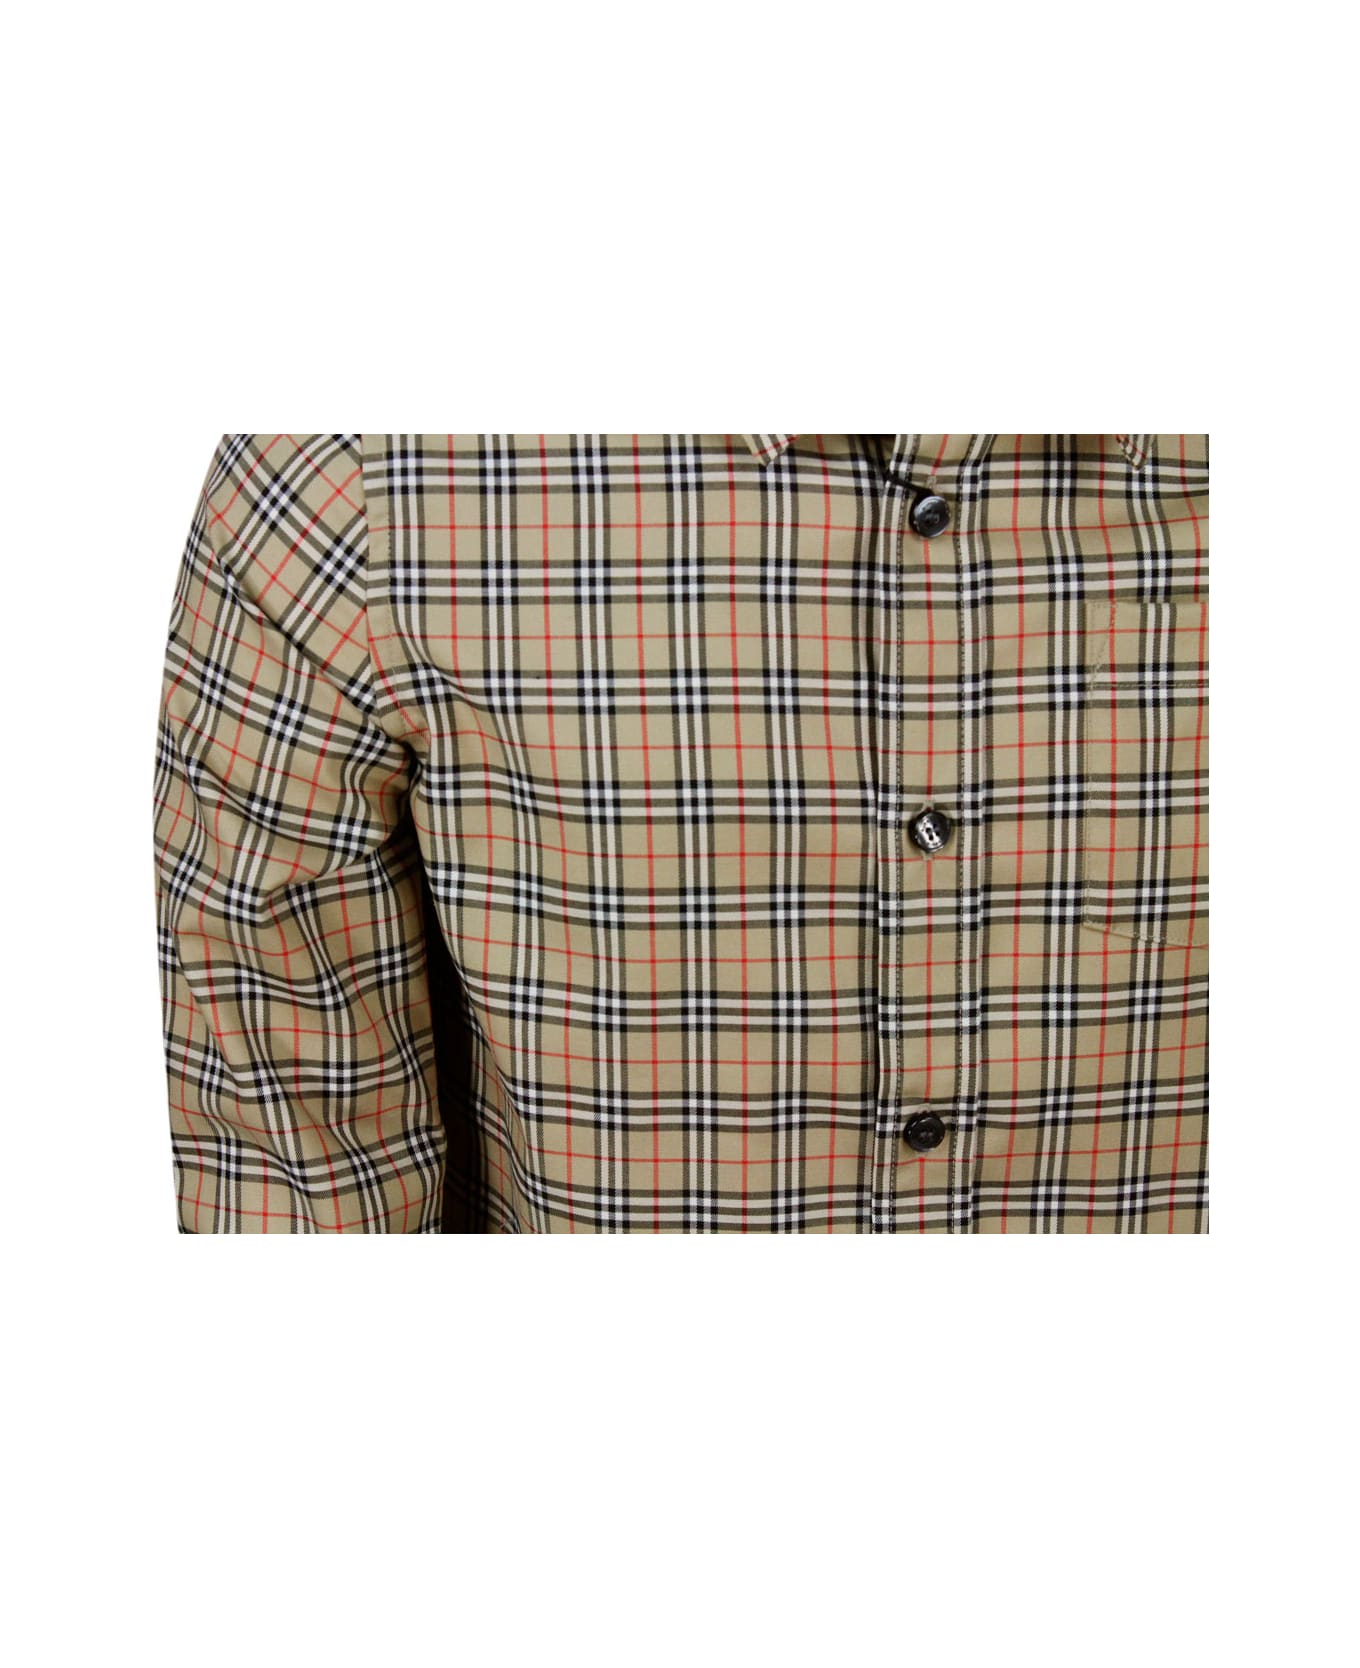 Burberry Long-sleeved Shirt In Stretch Cotton With Micro Tartan Motif - Beige